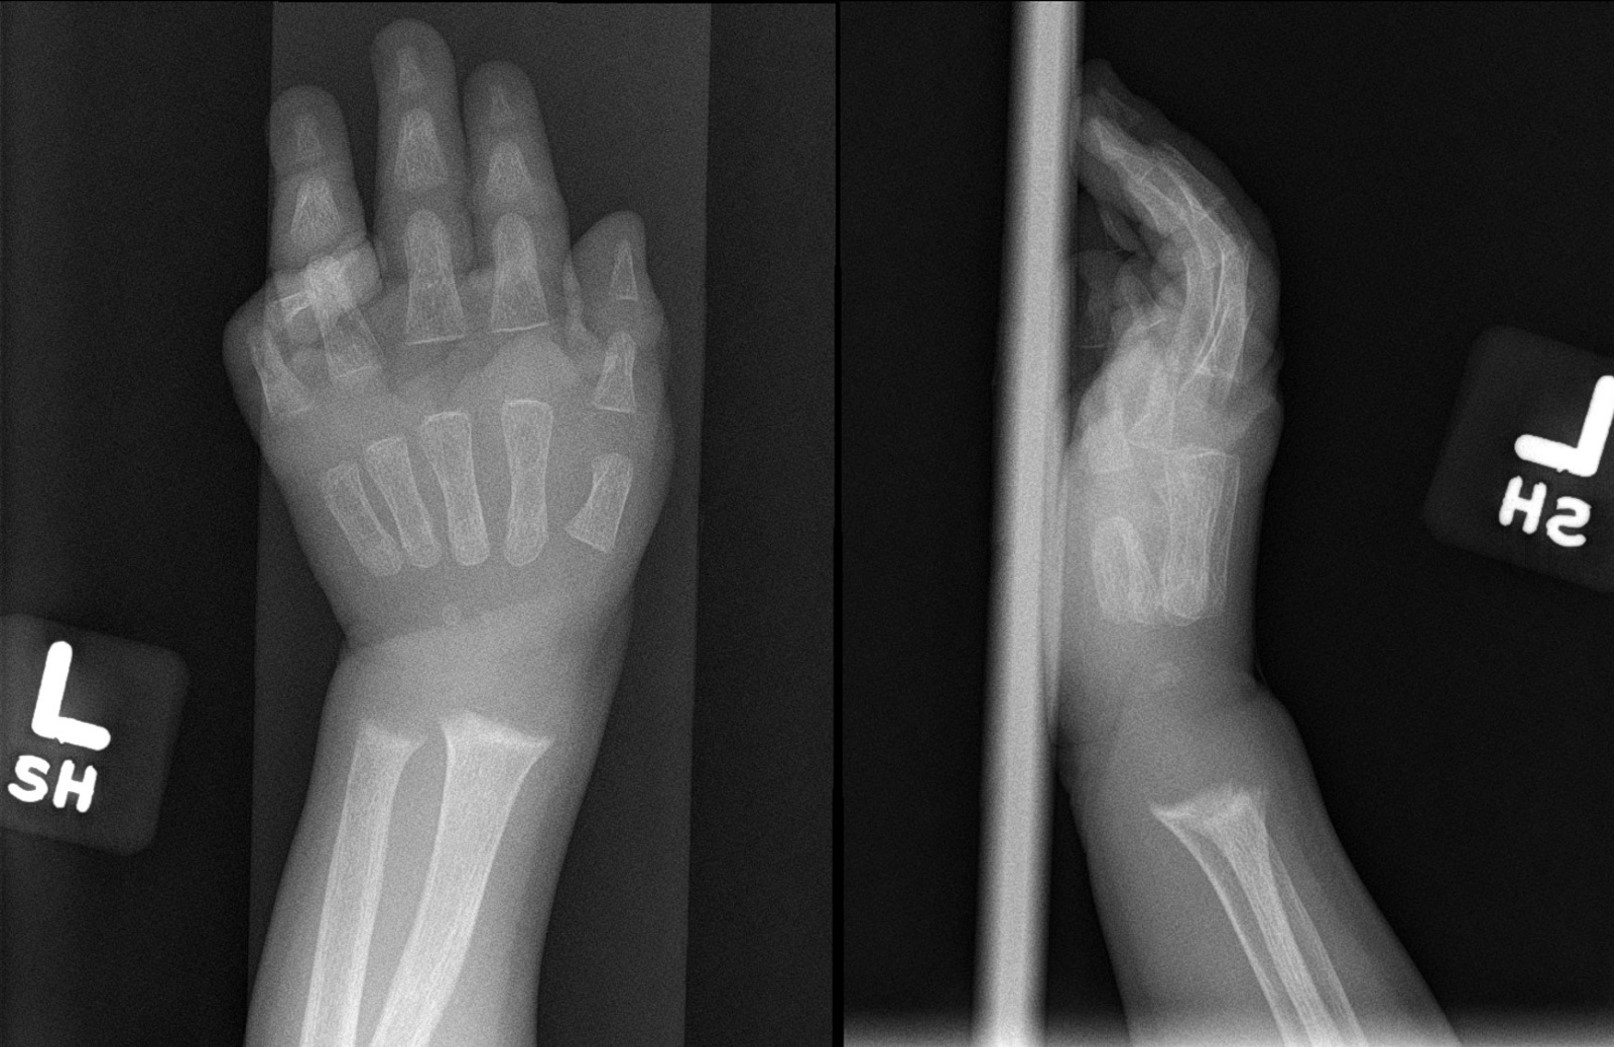 Radiograph of the left wrist (anteroposterior and lateral views) showing metaphyseal widening and irregularity of the distal 